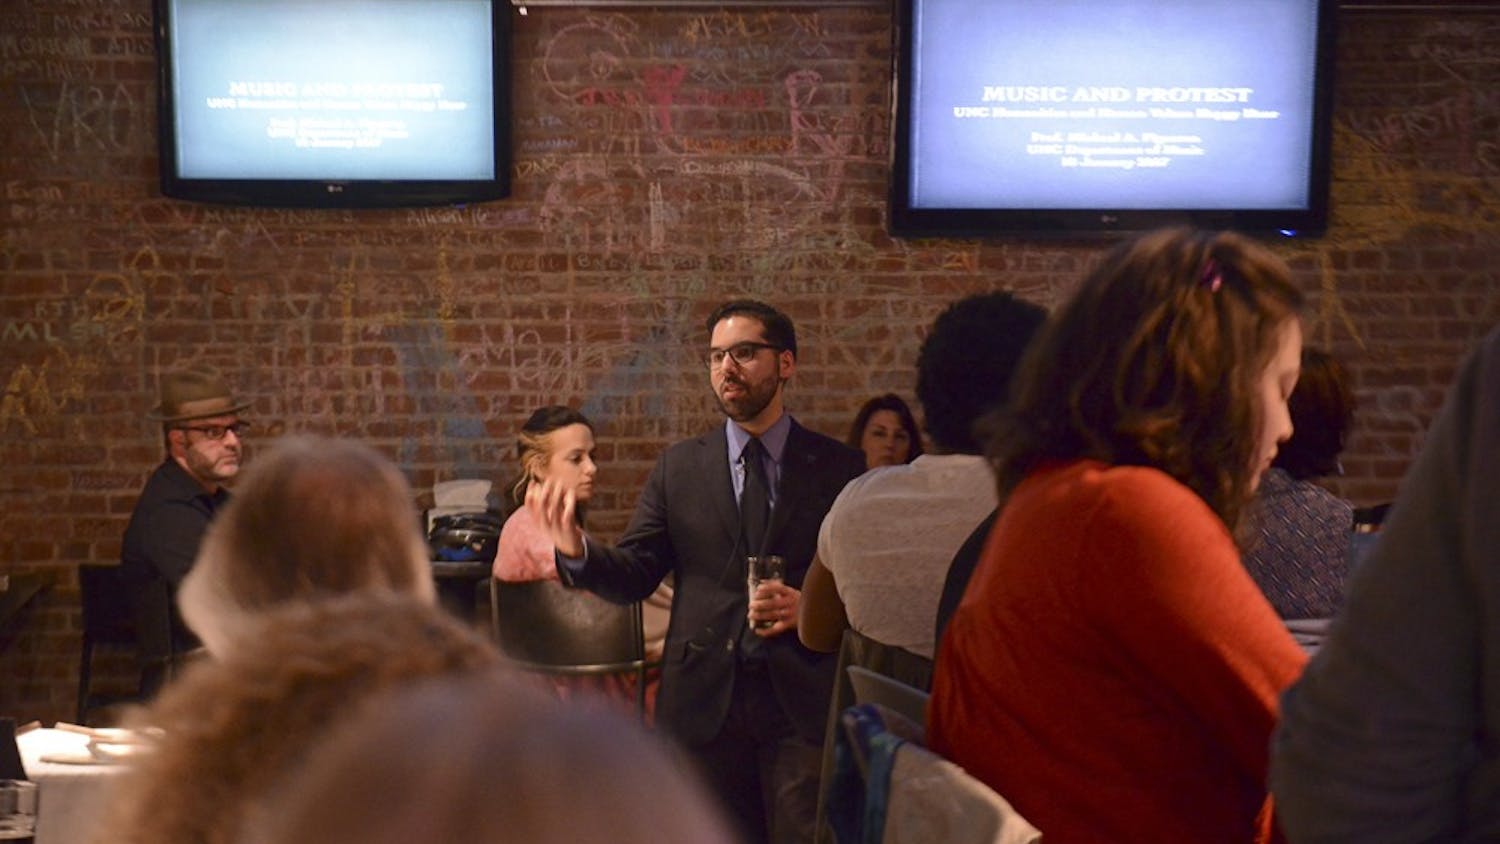 Michael Figueroa, an ethnomusicologist, gives a speech at the Humanities Happy Hour: Protest Music event on Wednesday night at Top of the Hill.